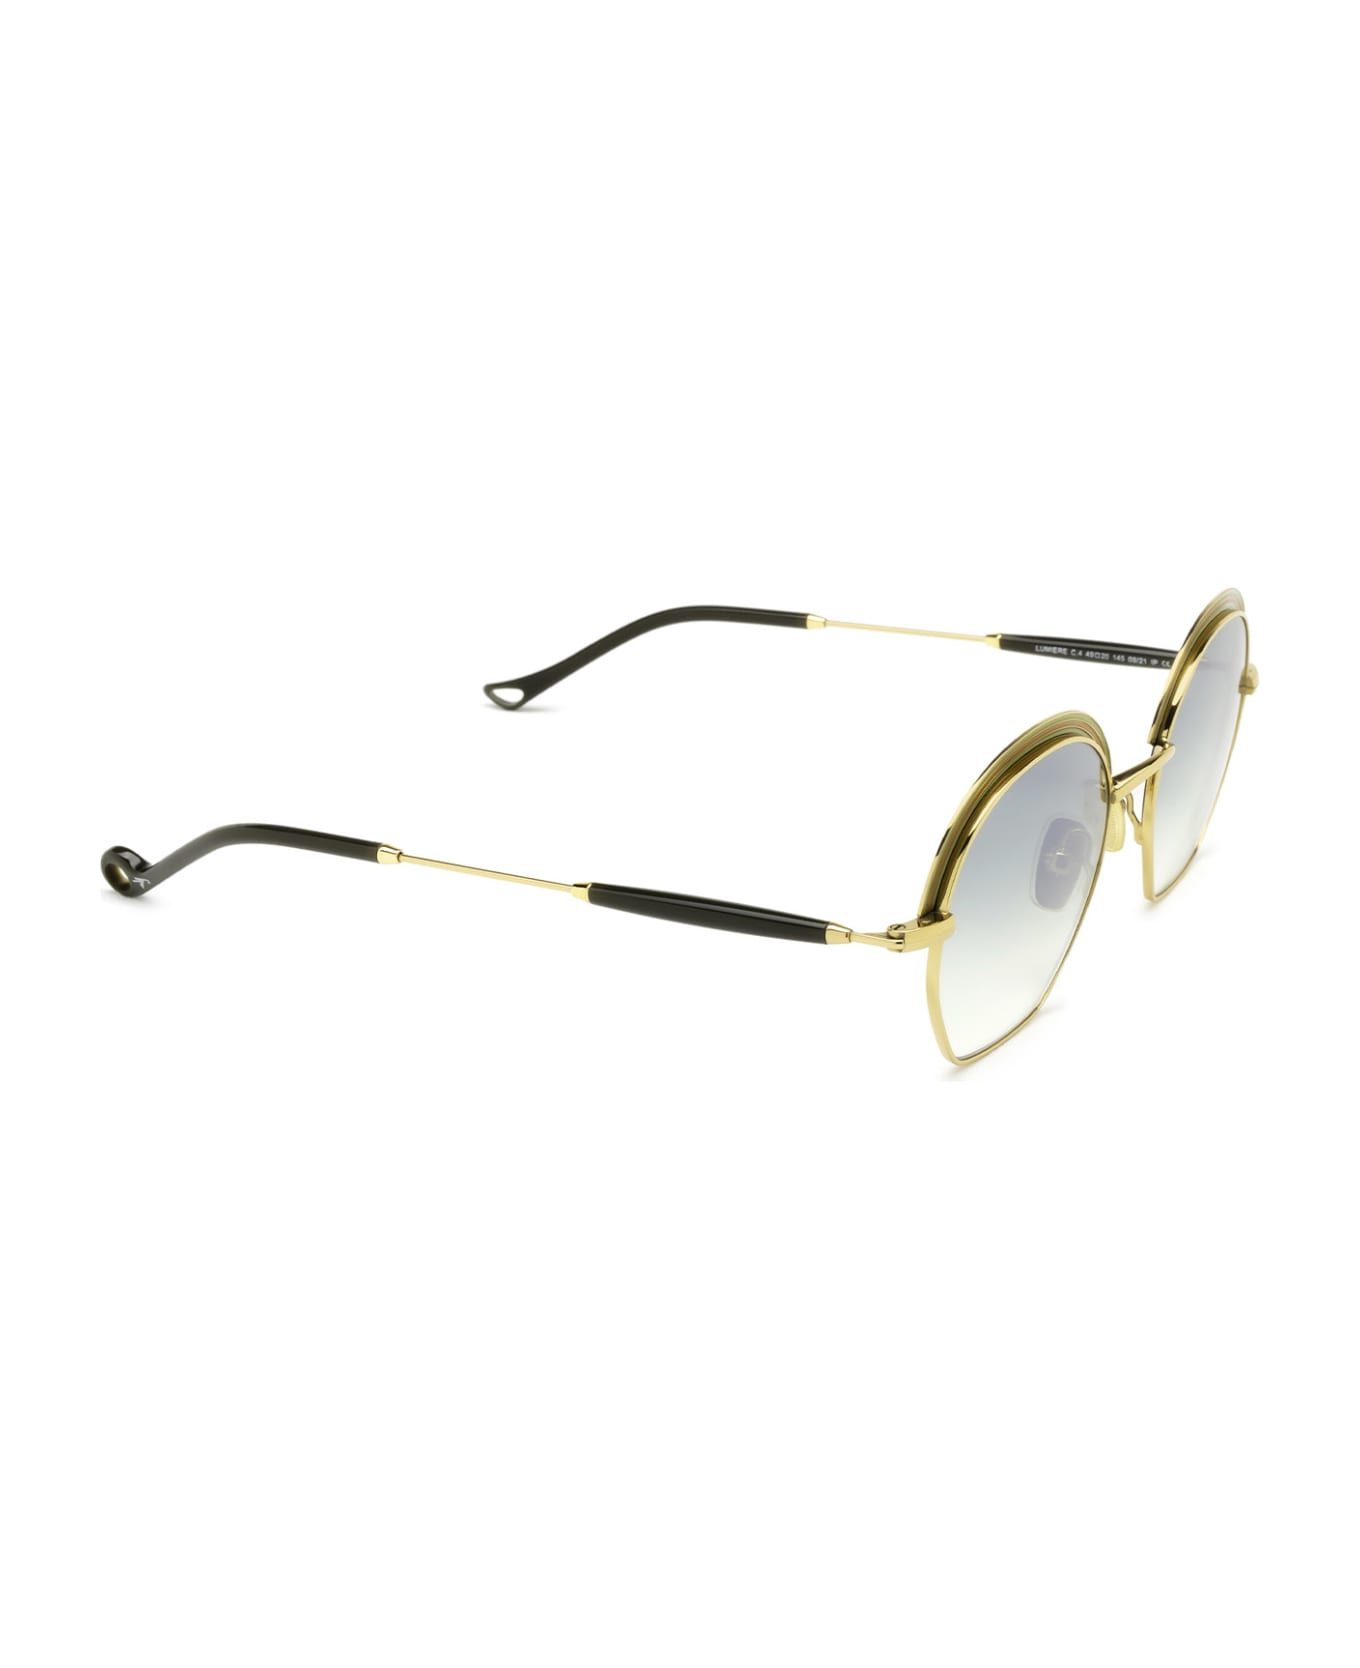 Eyepetizer Lumiere Sun Green And Gold Sunglasses - Green and Gold